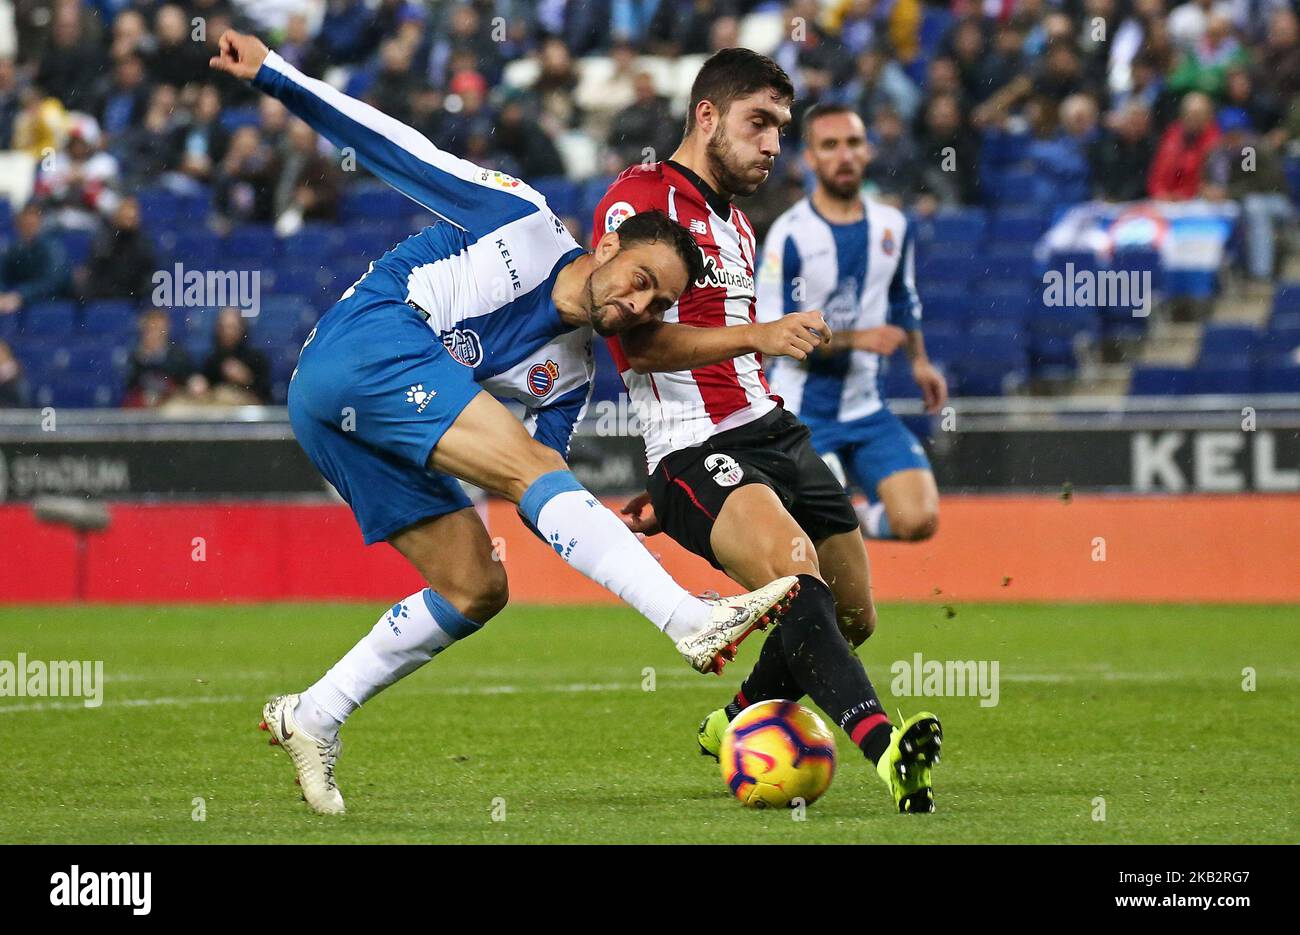 Sergio Garcia and Nunez during the match between RCD Espanyol and Athletic Club Bilbao, corresponding to the week 11 of que spanish league, played at the RCDE Stadium, on 05th November, 2018, in Barcelona, Spain. (Photo by Joan Valls/Urbanandsport/NurPhoto) Stock Photo